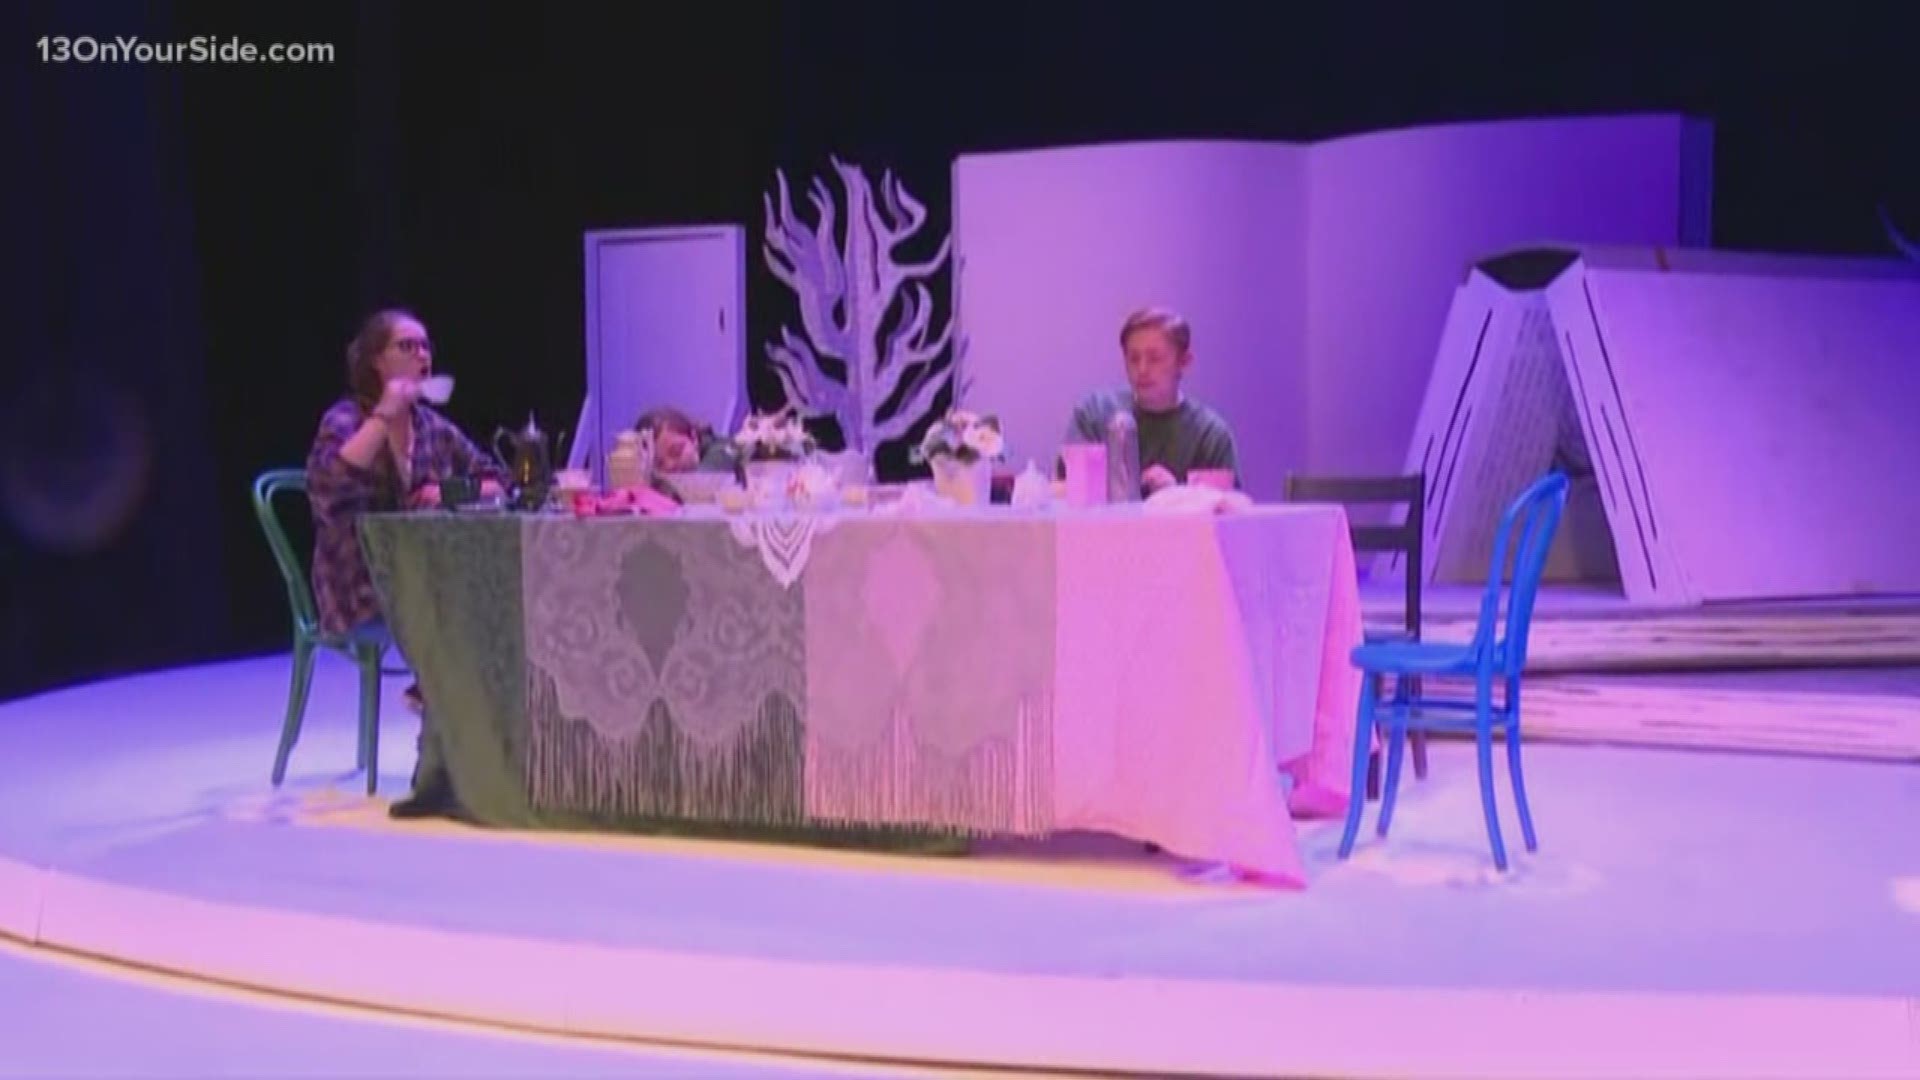 Students gave 13 ON YOUR SIDE a preview of their production, 'Alice in Wonderland.'